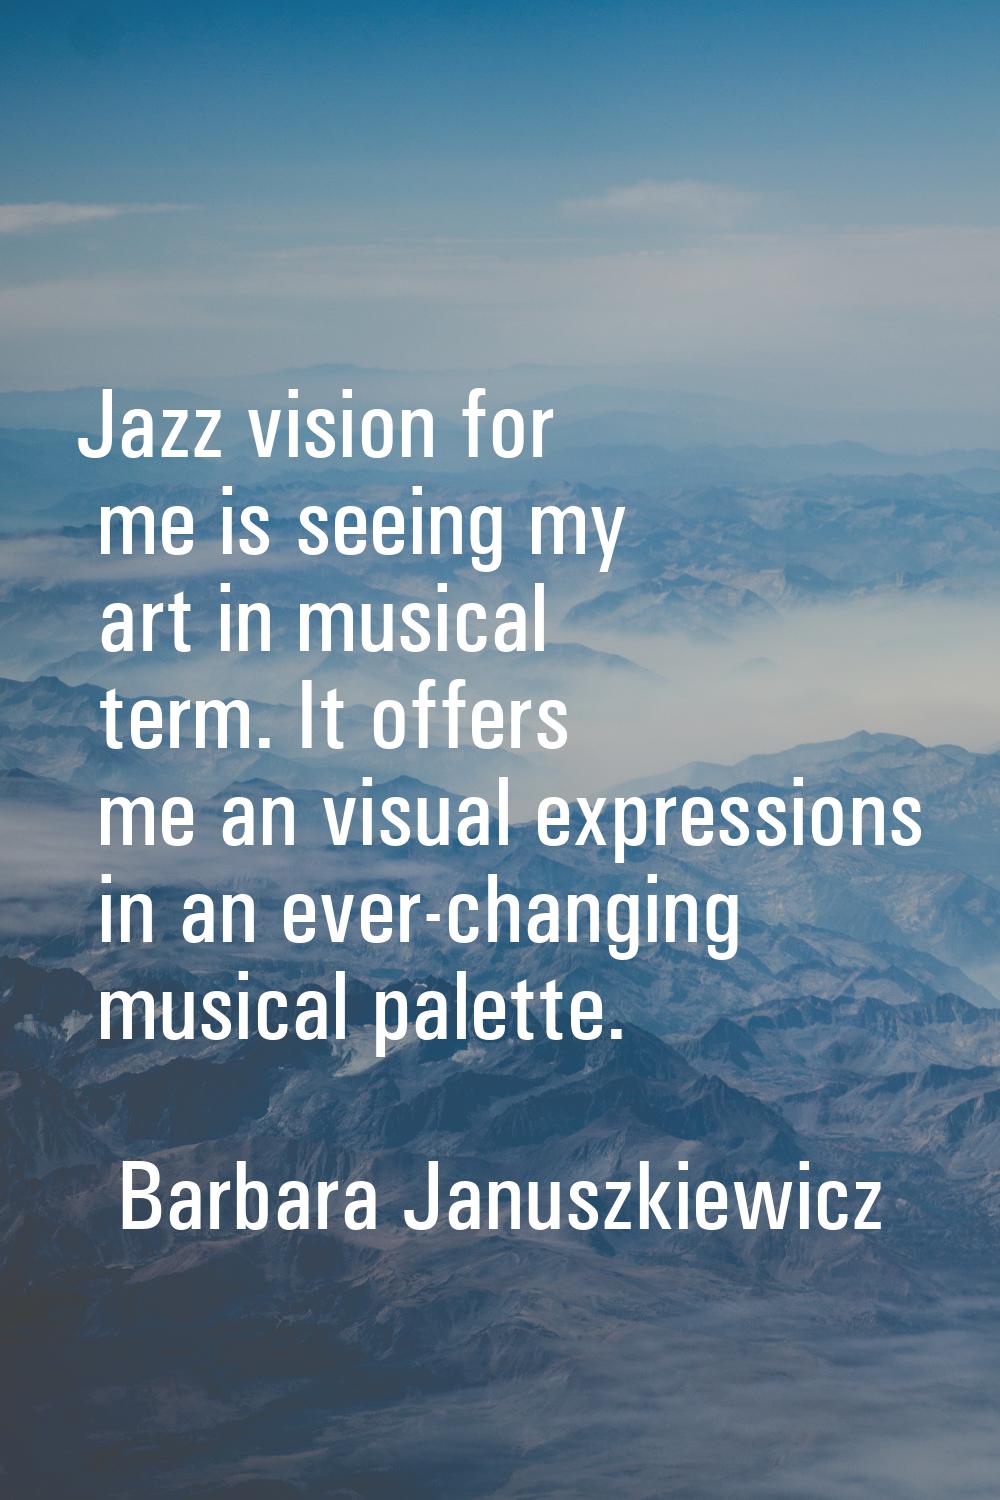 Jazz vision for me is seeing my art in musical term. It offers me an visual expressions in an ever-